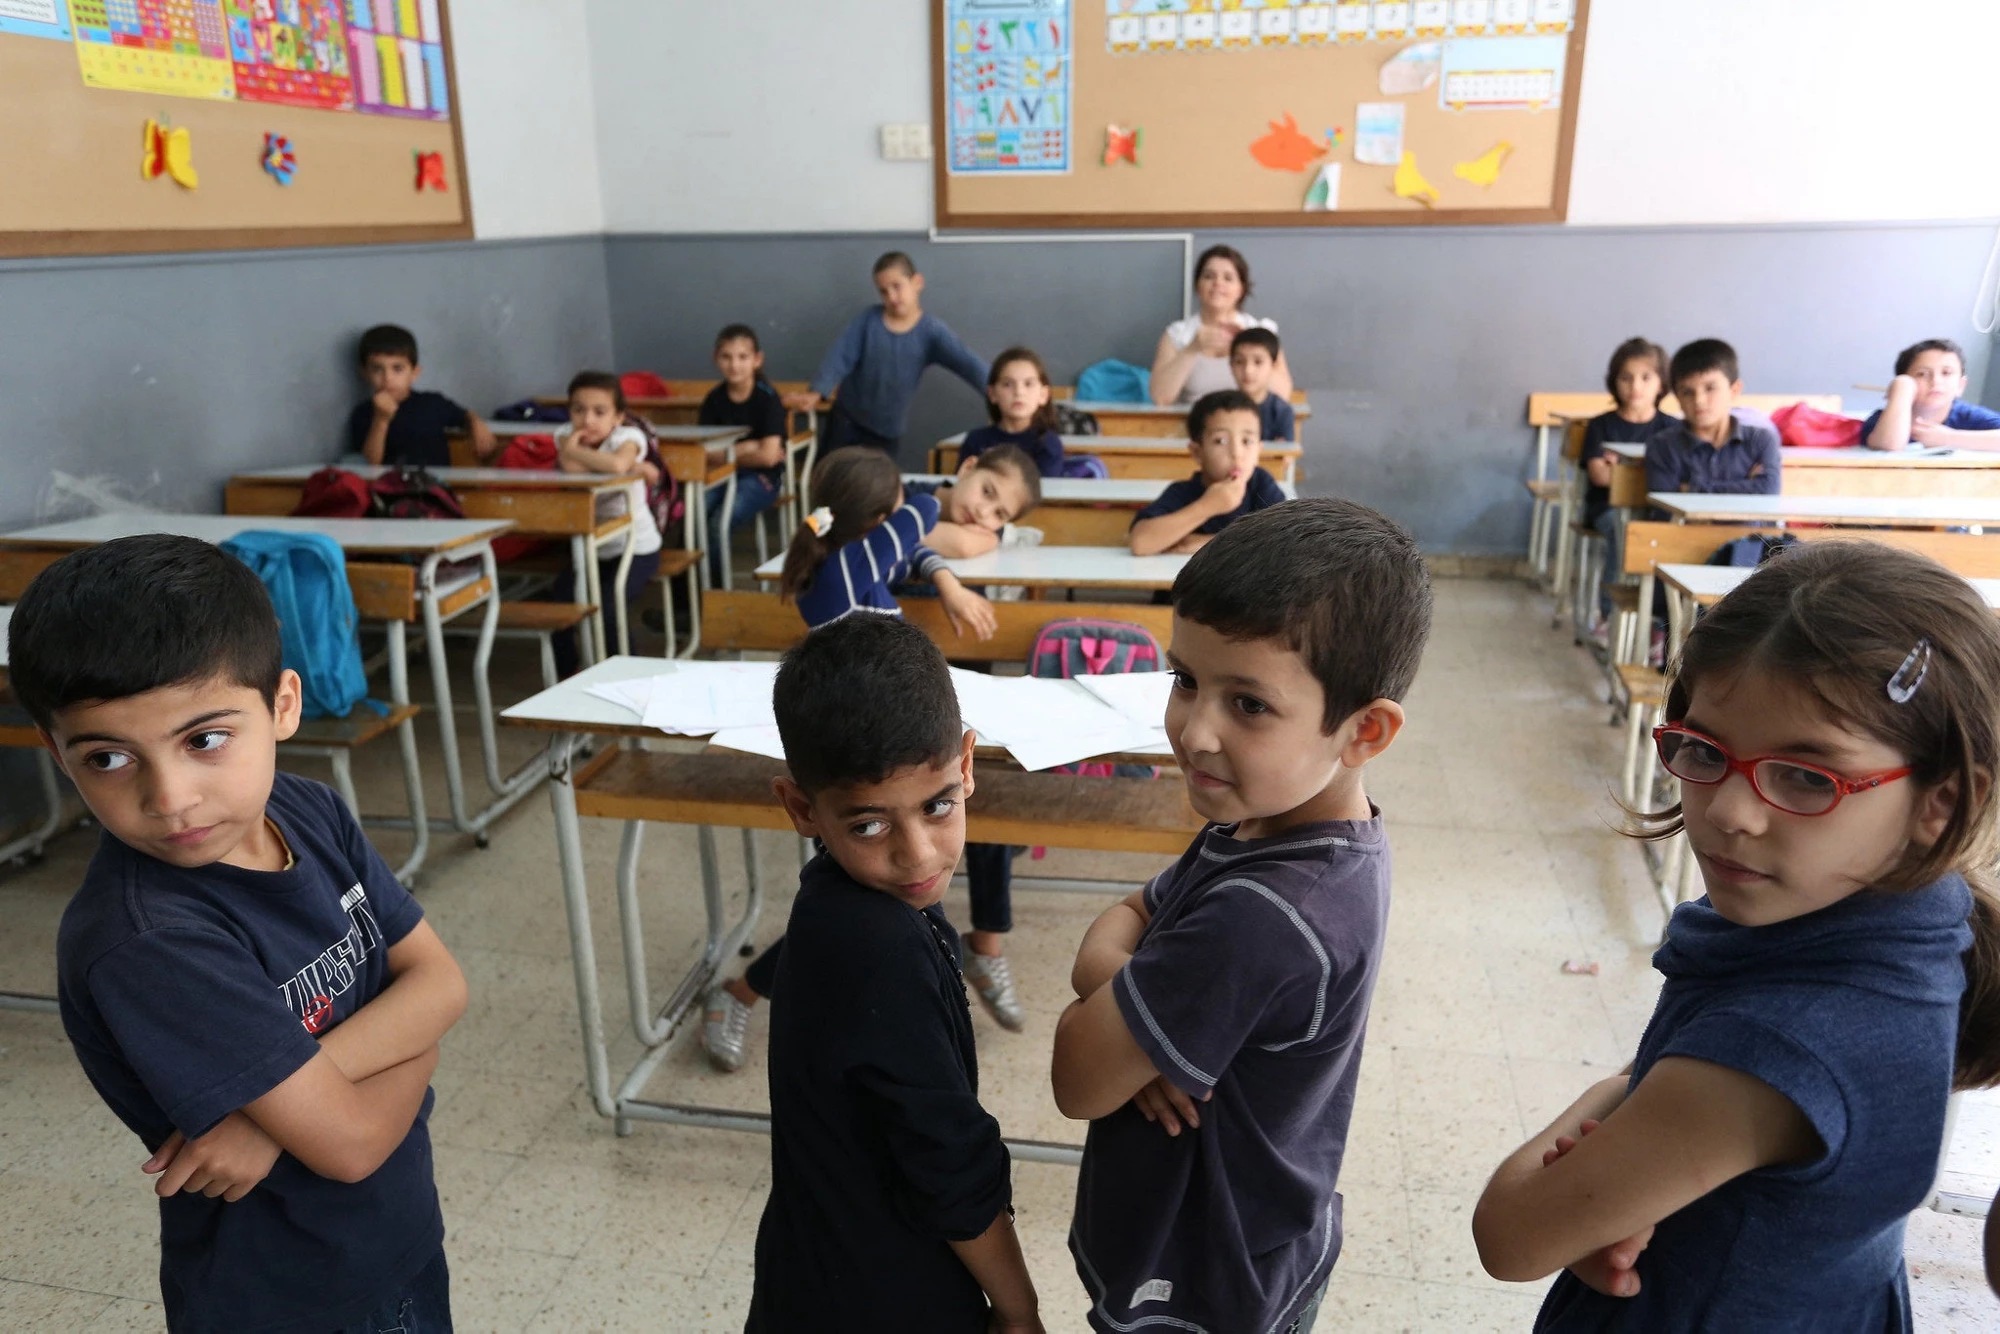 Syrian refugee students listen to their school teacher during math classes at a public school in Beirut, Lebanon